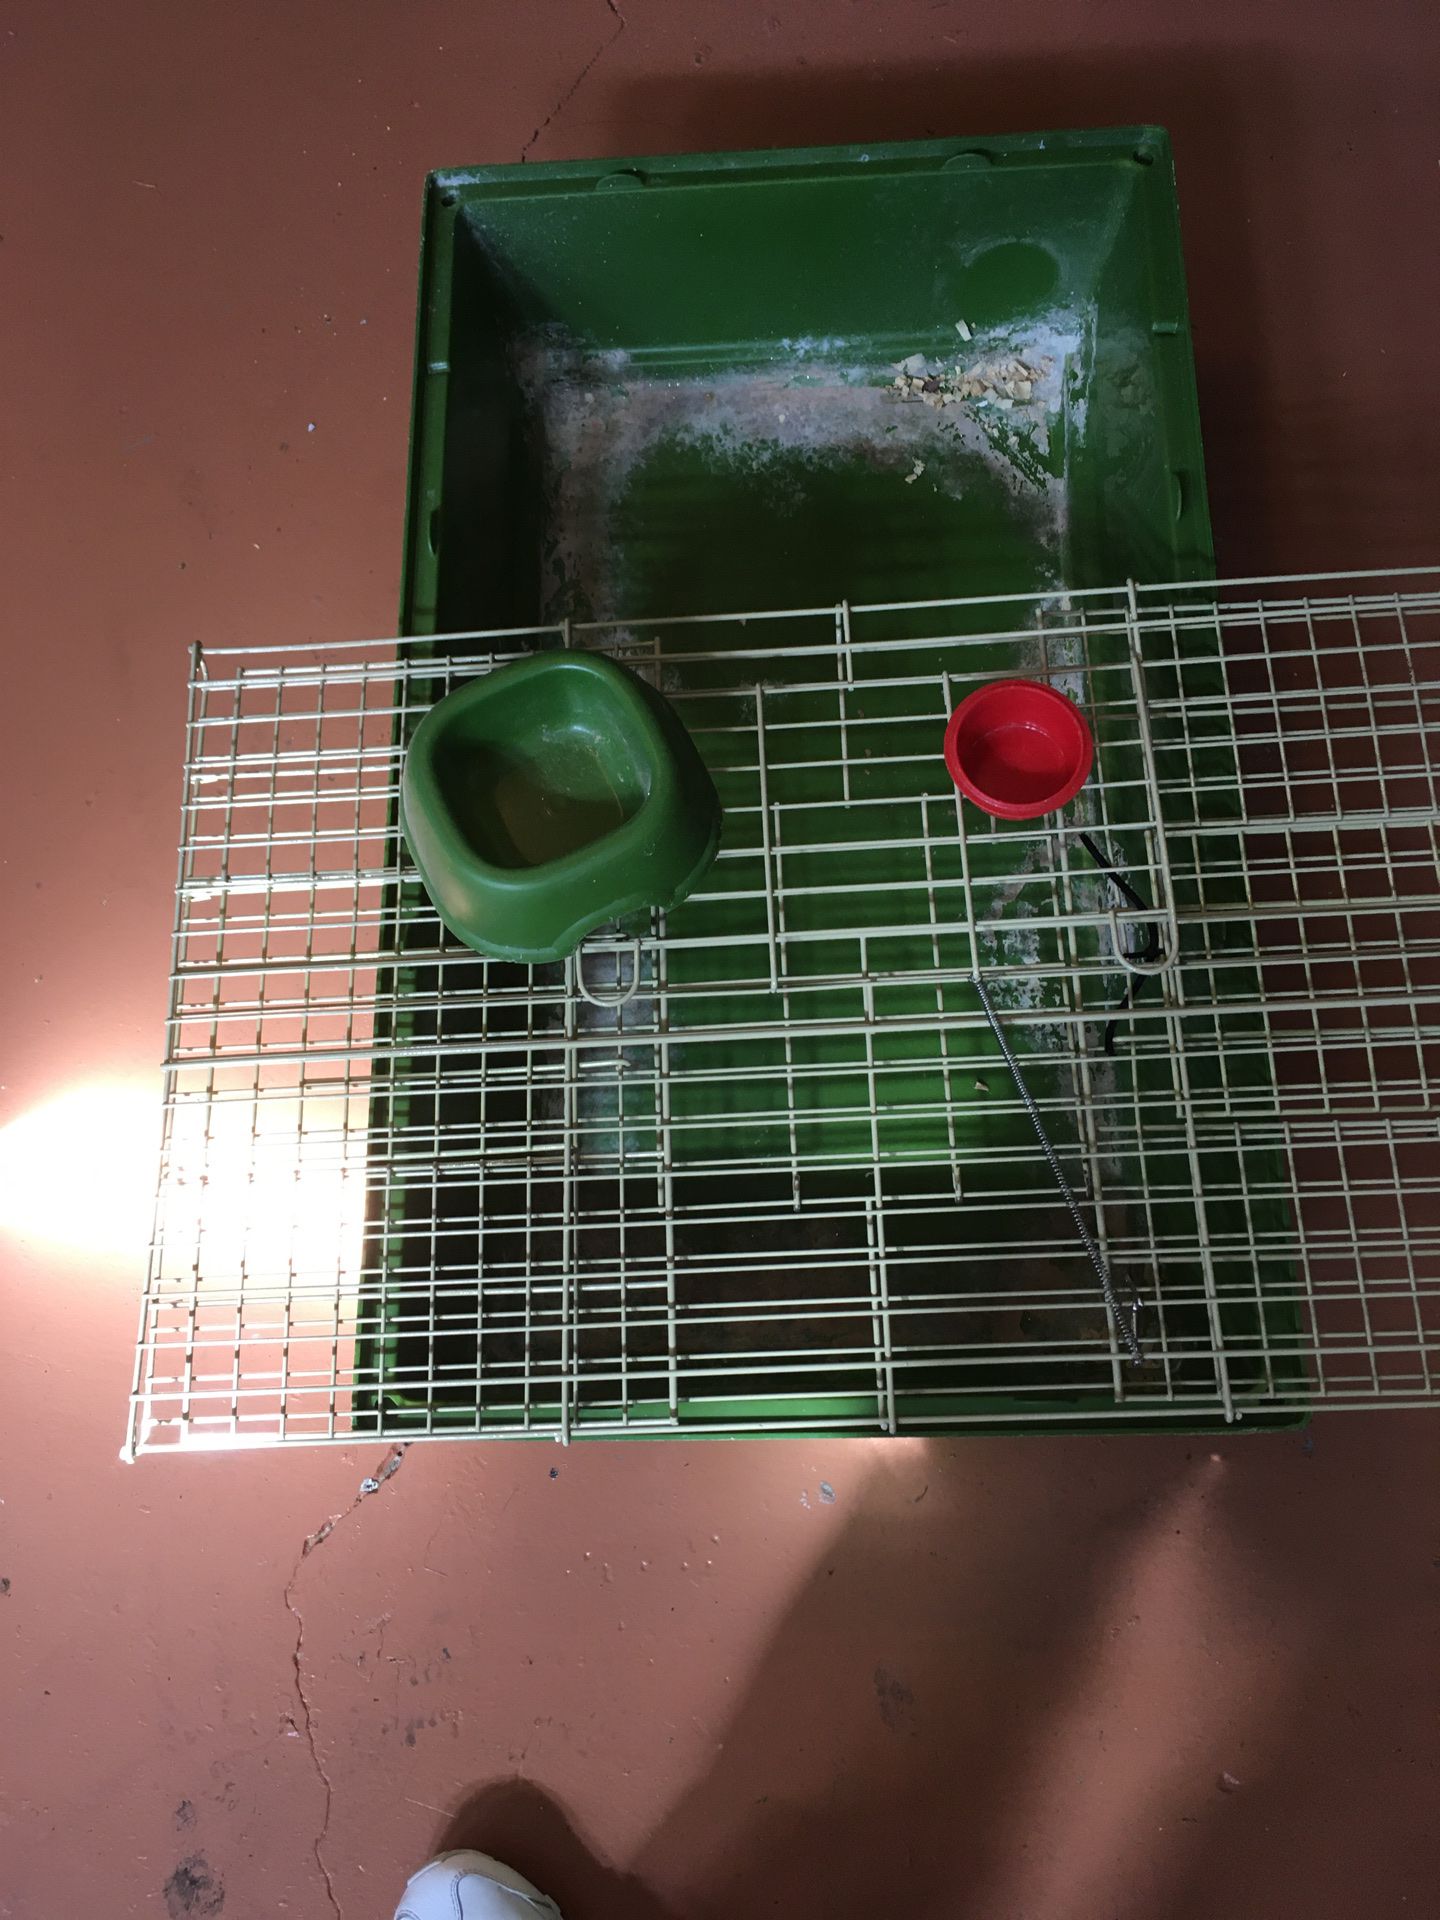 Cage for a guinea pig or any such animal you would like used